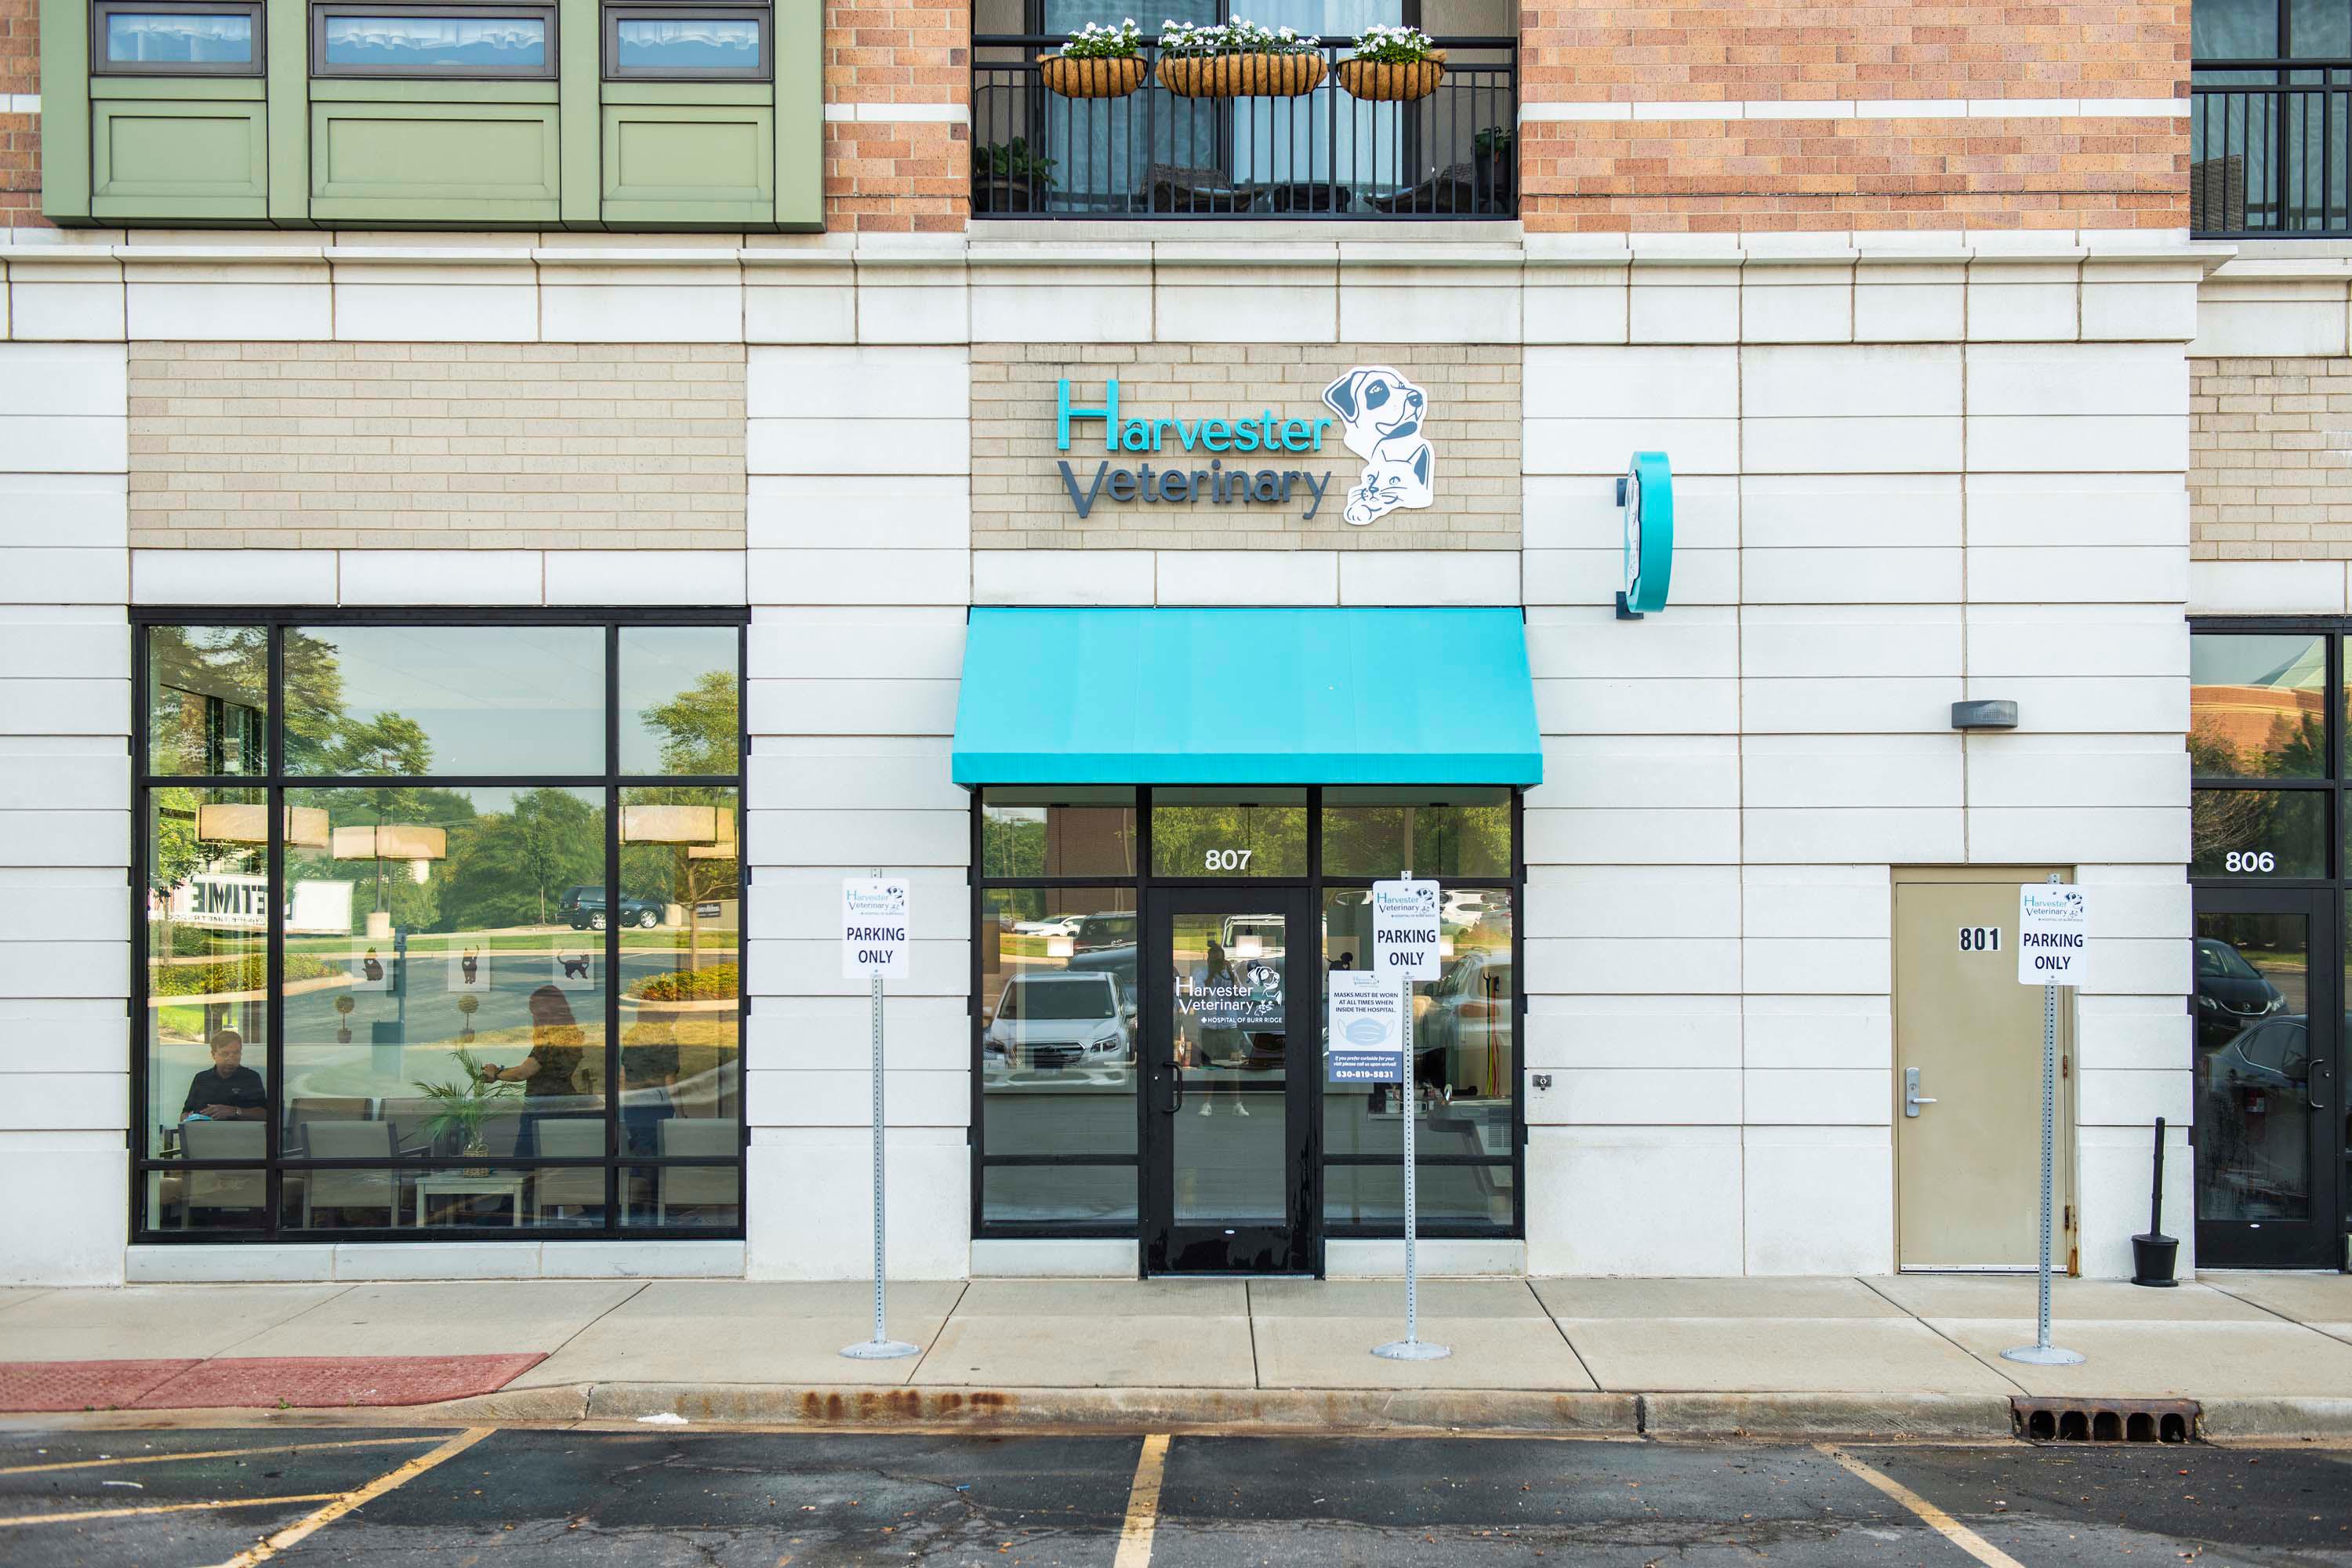 Harvester Veterinary Hospital is a state-of-the-art facility that allows us to meet the health needs of the pets in our community, and we’re also proud to uphold rigorous industry standards.